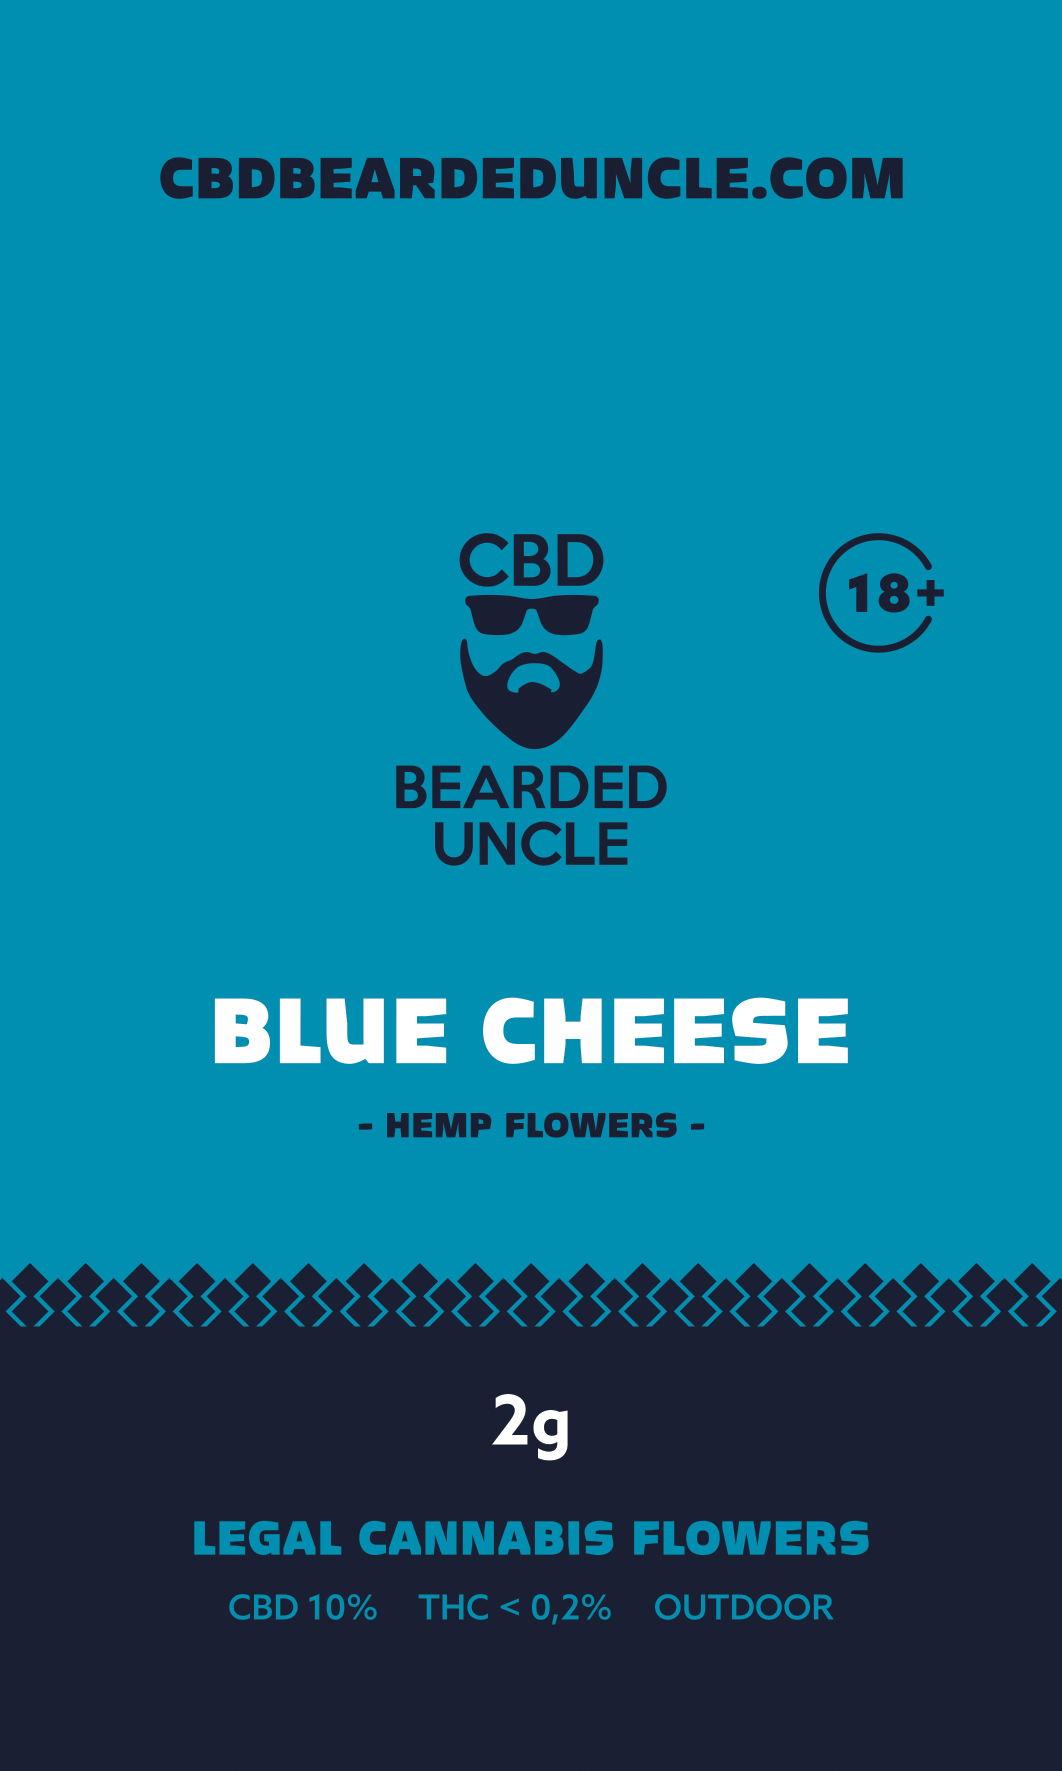 BEARDED UNCLE BLUE CHEESE OUTDOOR CBD 10% a THC 0,2% 2g 